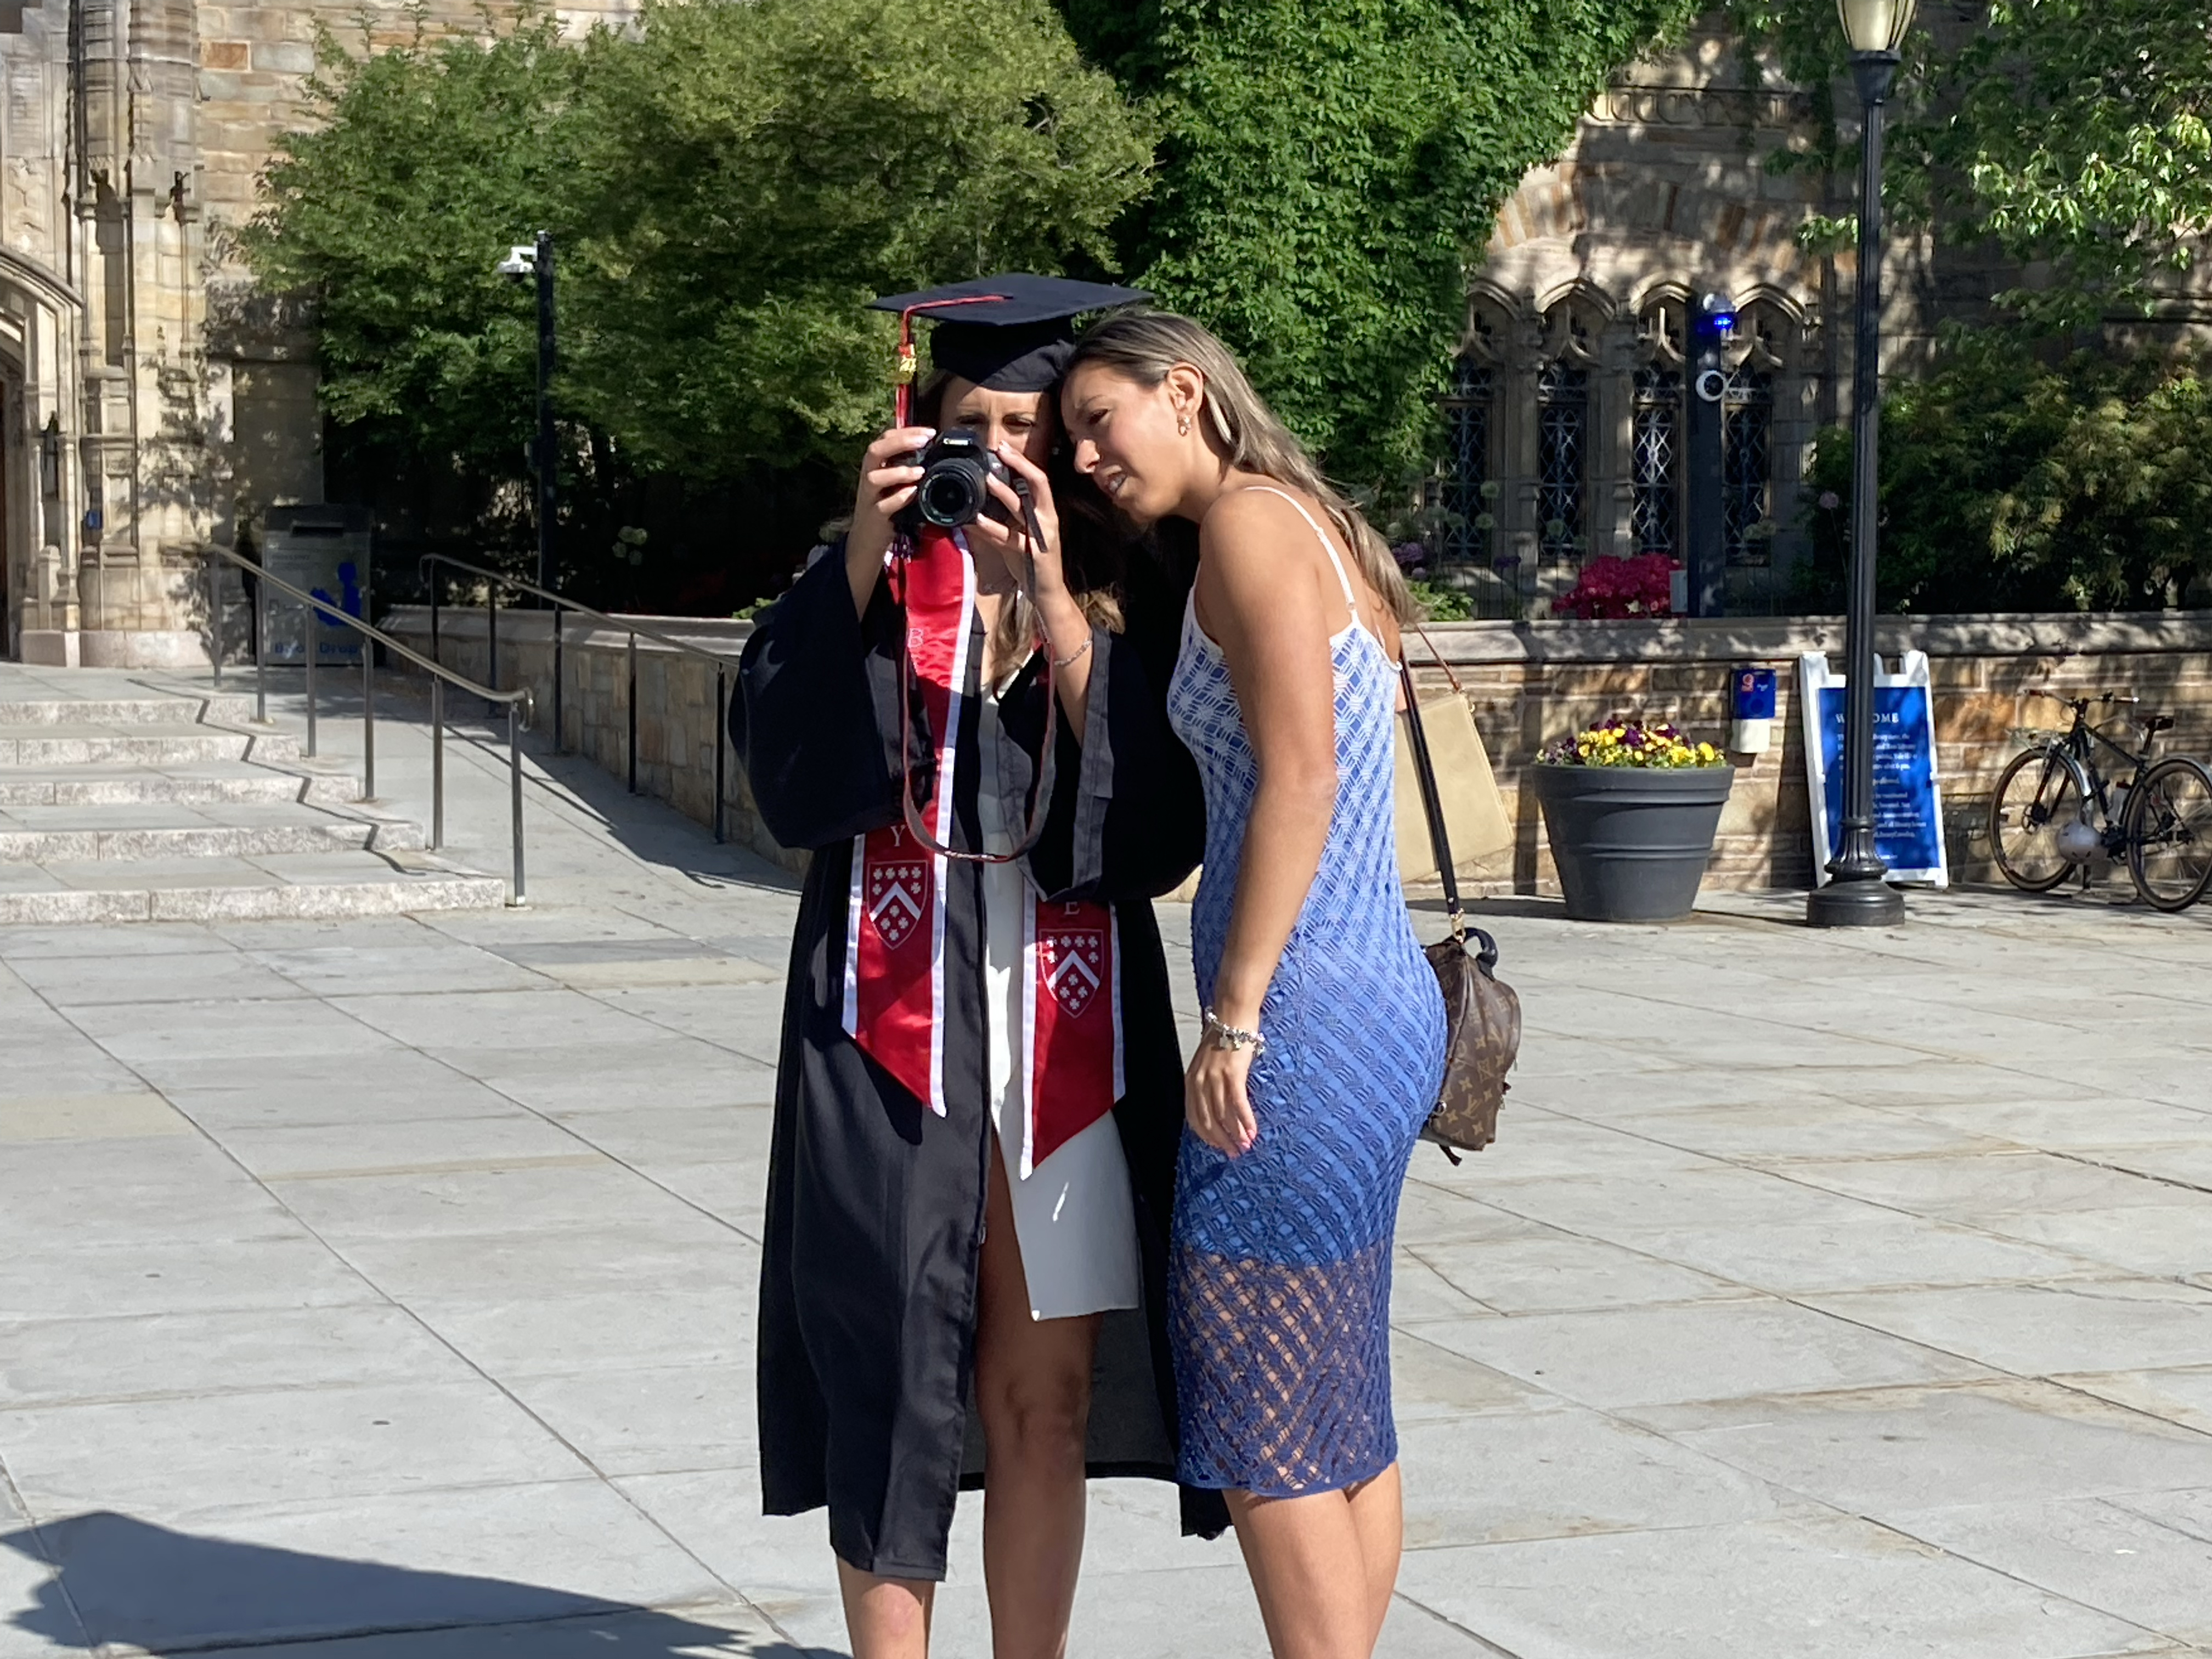 The graduate in cap and gown with red stole and her friend, wearing a blue lacy sundress peer at the back of a camera, heads together, to examine the photo they just took.